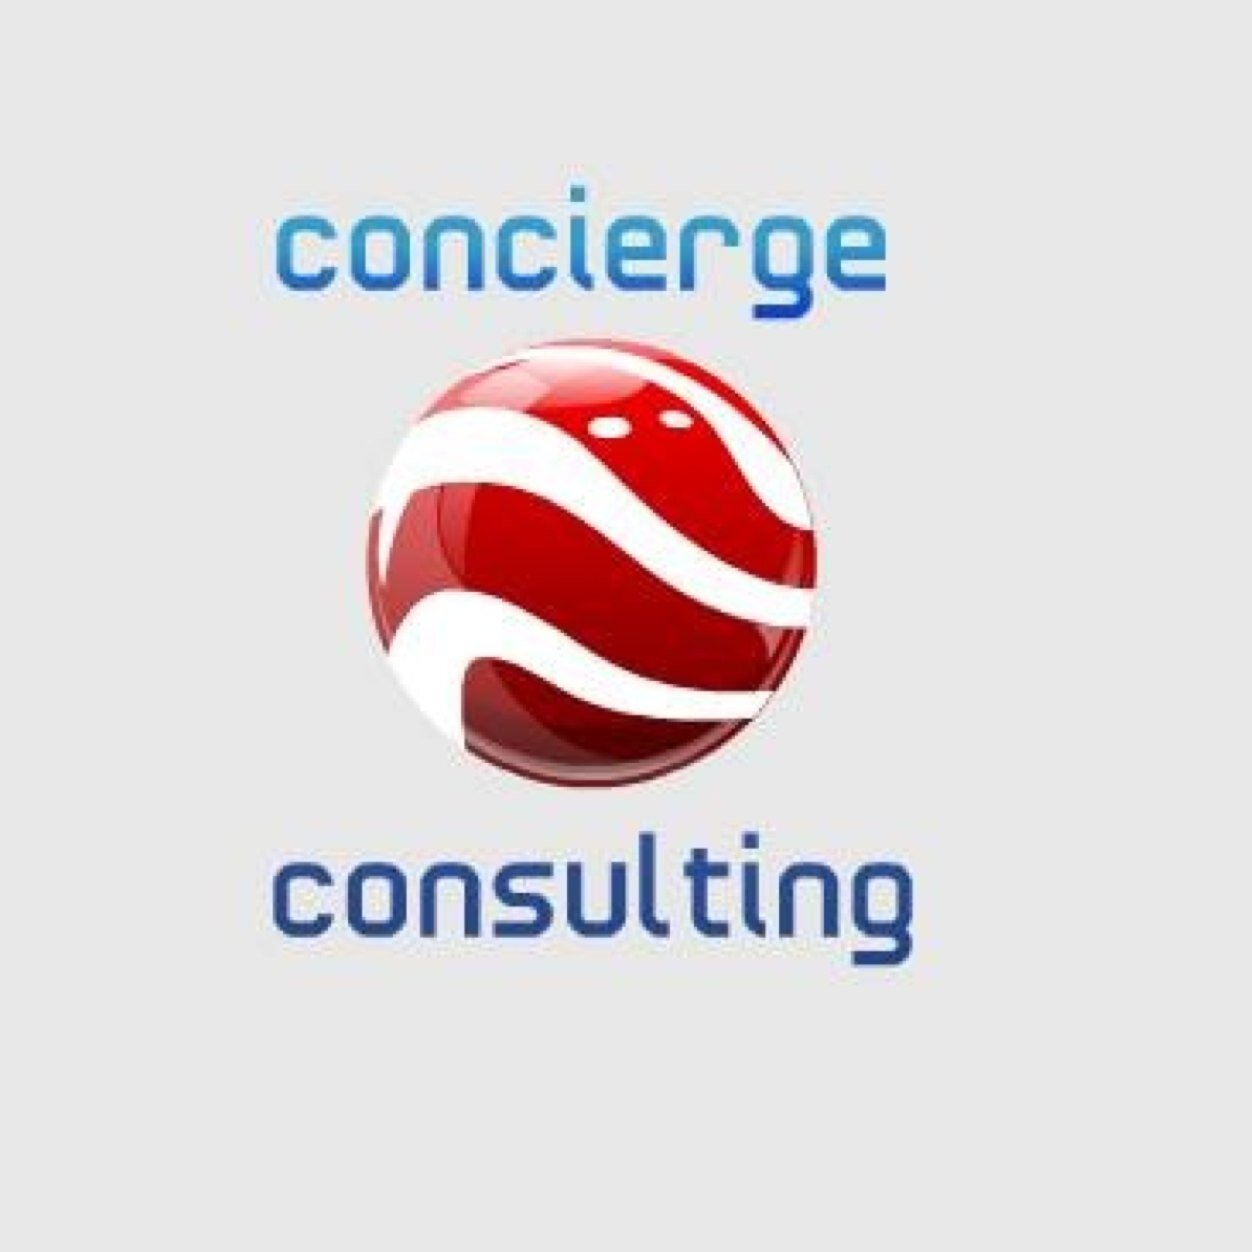 Focused on creating operational efficiencies throughout your organization with Professional and Personal Concierge Consulting Services 615-926-2130